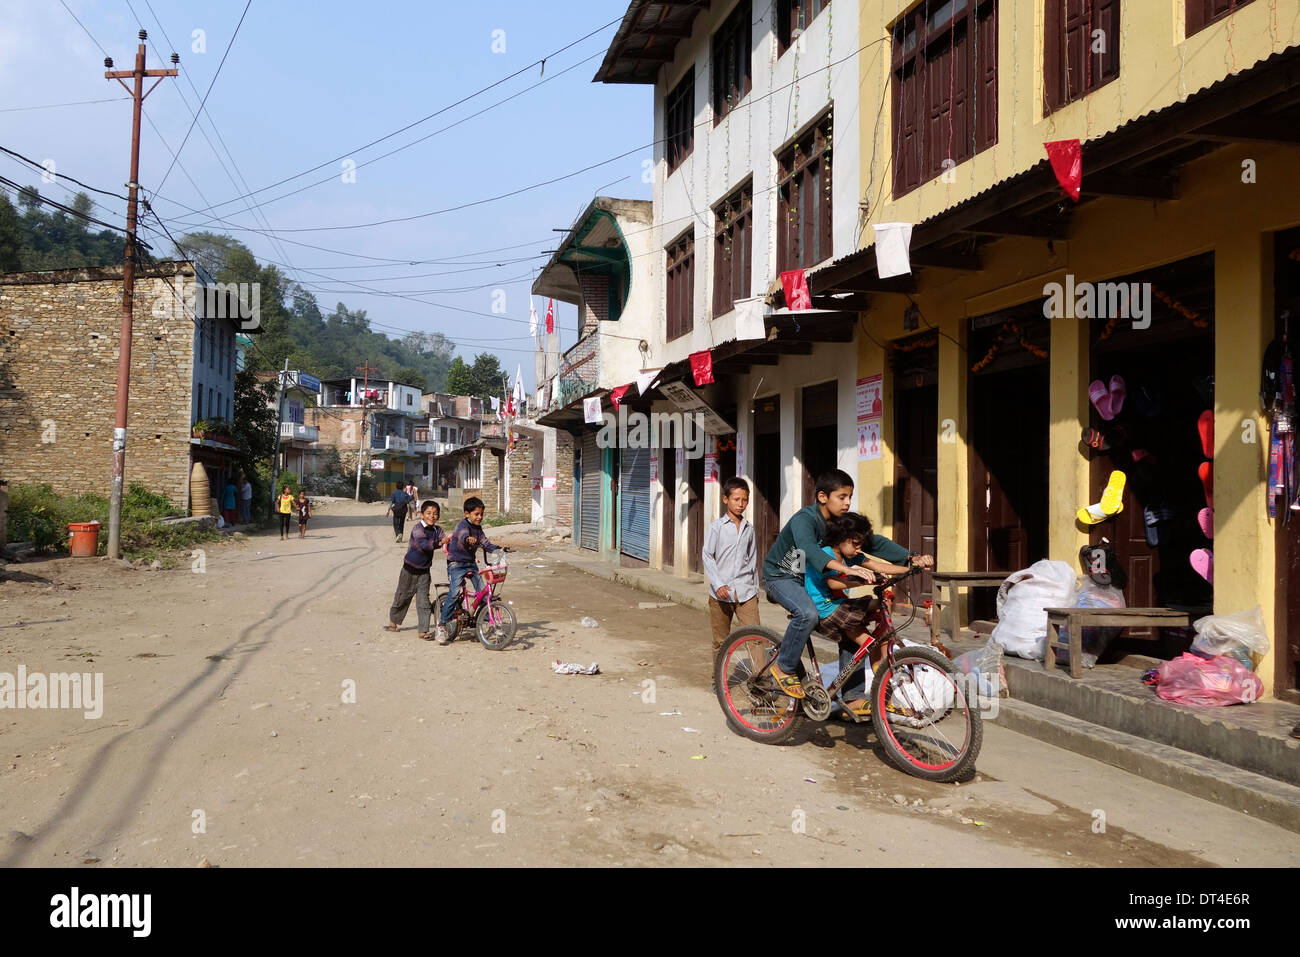 Children in the town of Arughat Bazar in the Gorkha region of Nepal. Stock Photo